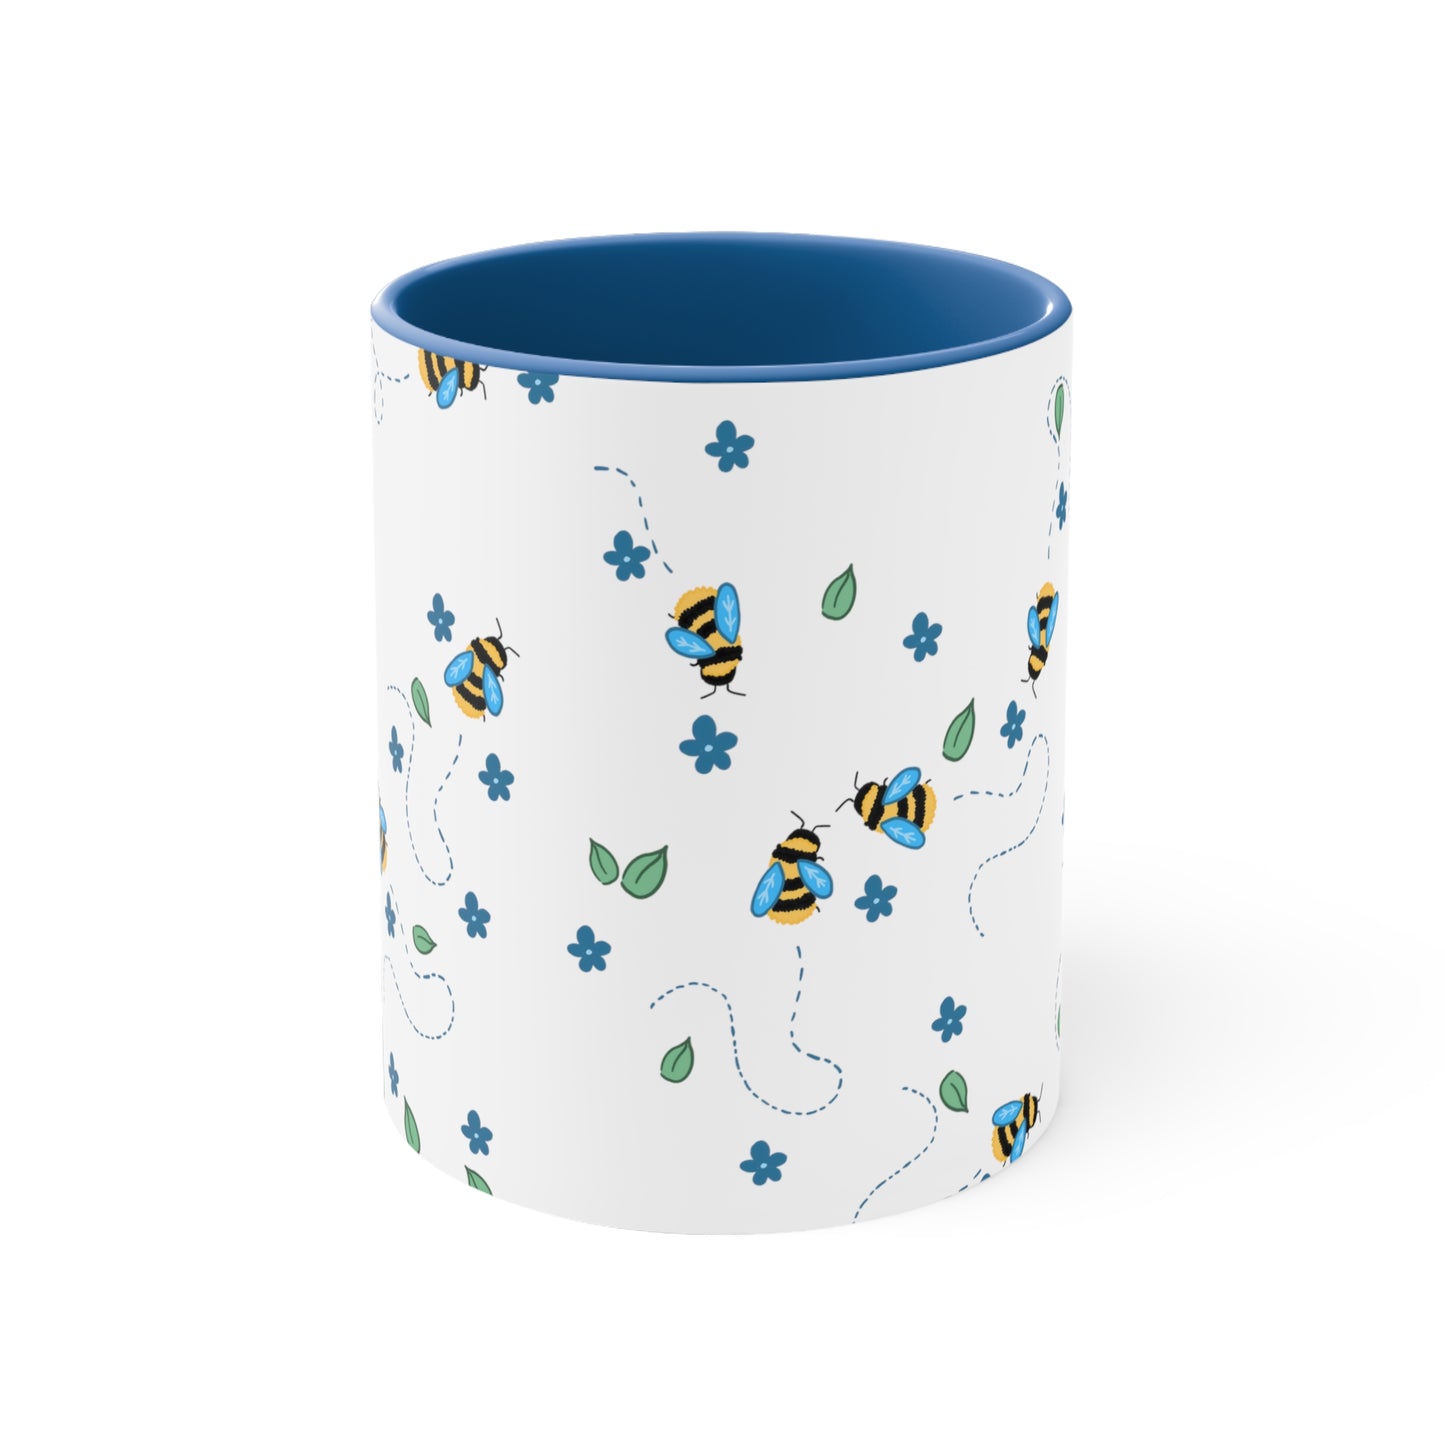 Cartoon bees With broken line trails behind them, Dark blue flowers, Loose green leaves In an all over pattern on top of a white background. The inside of the mug, and the handle is a medium dark blue color